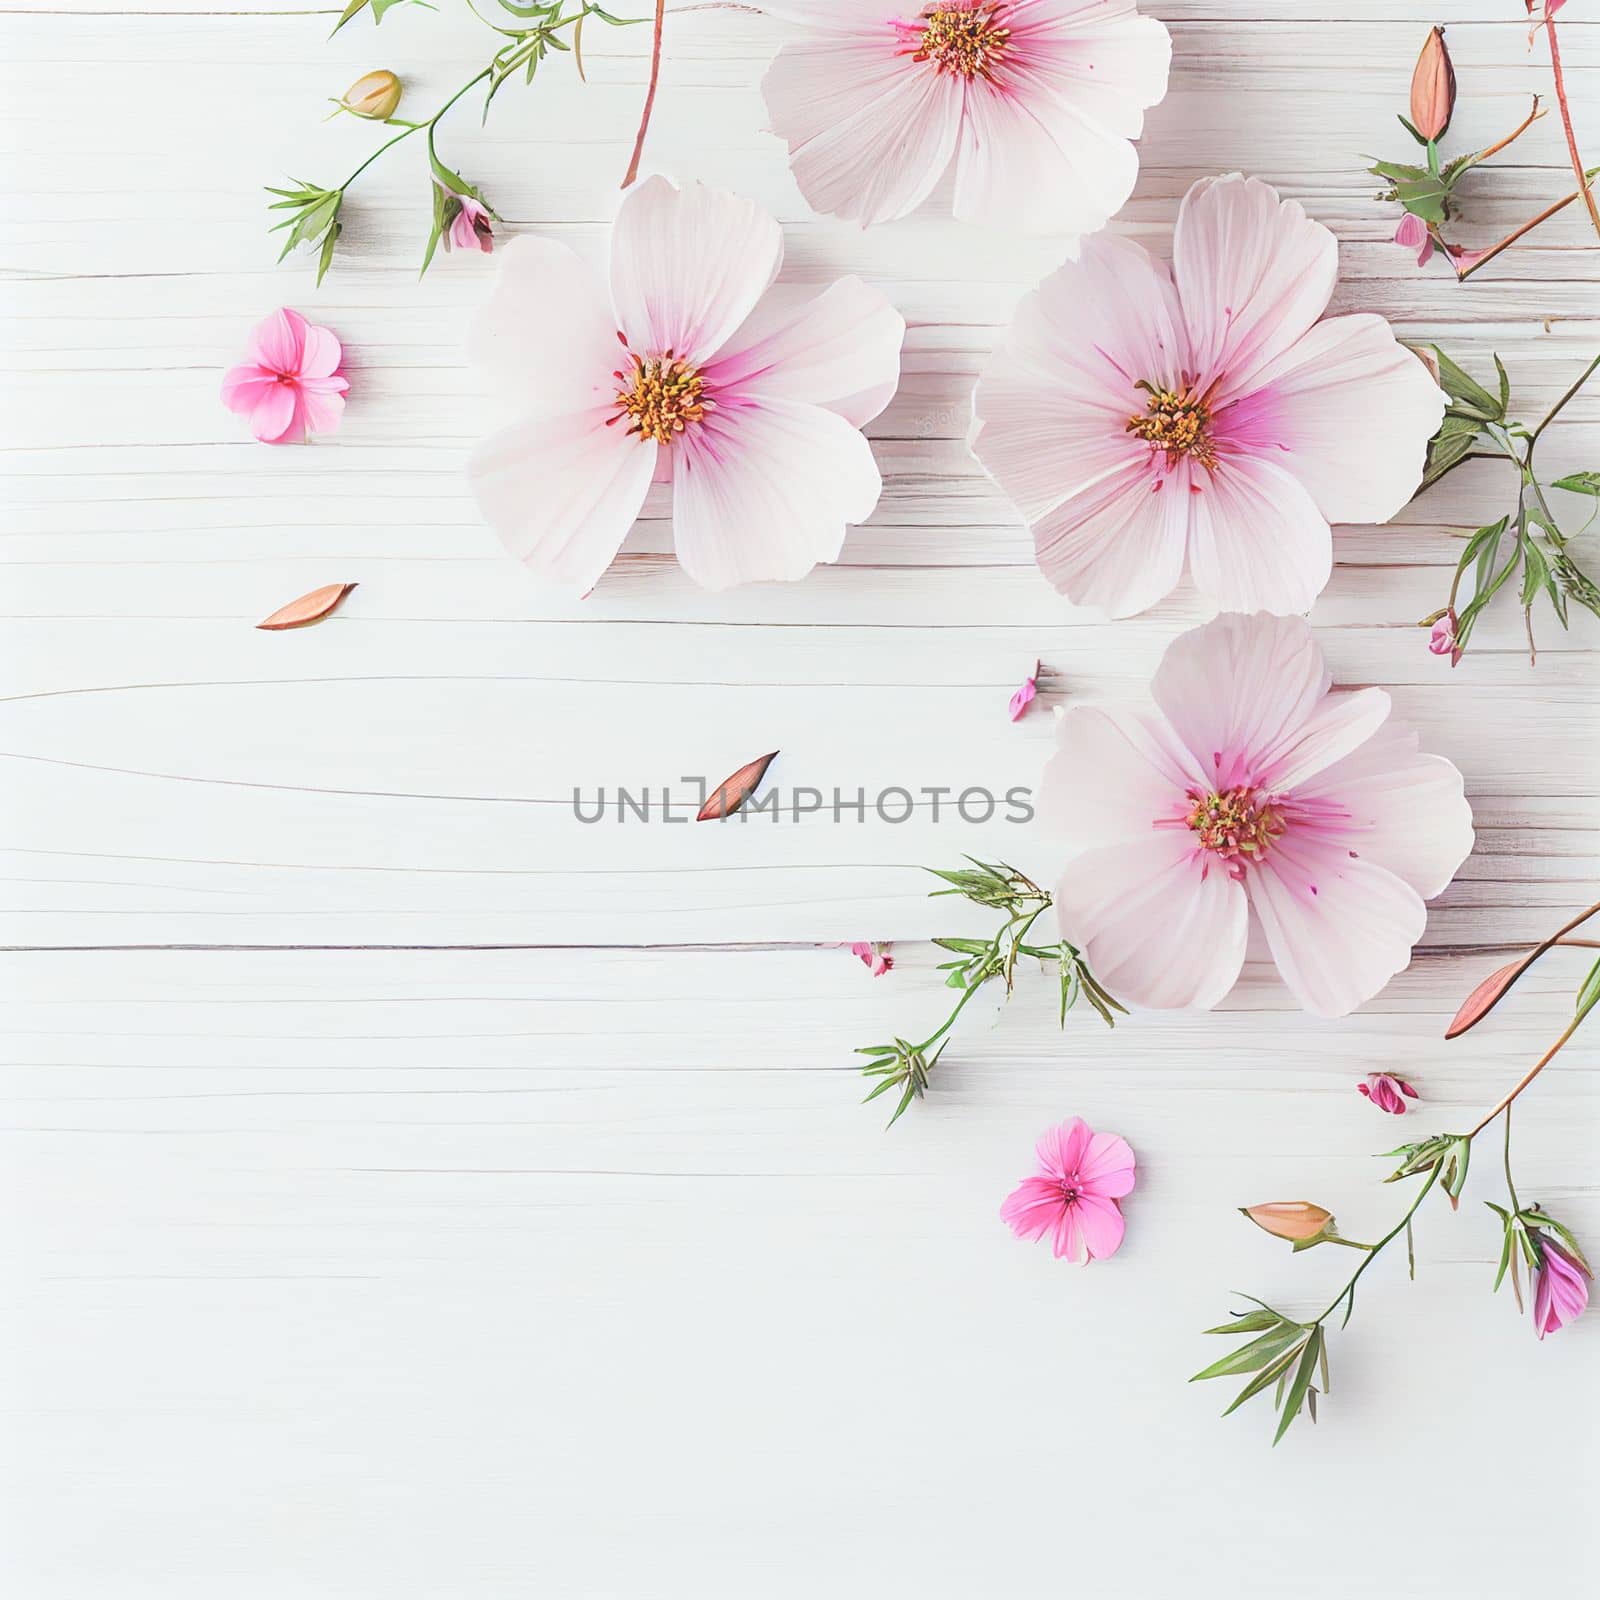 Beautiful pink flowers on white wooden background, Valentine's day concept with copy space by FokasuArt